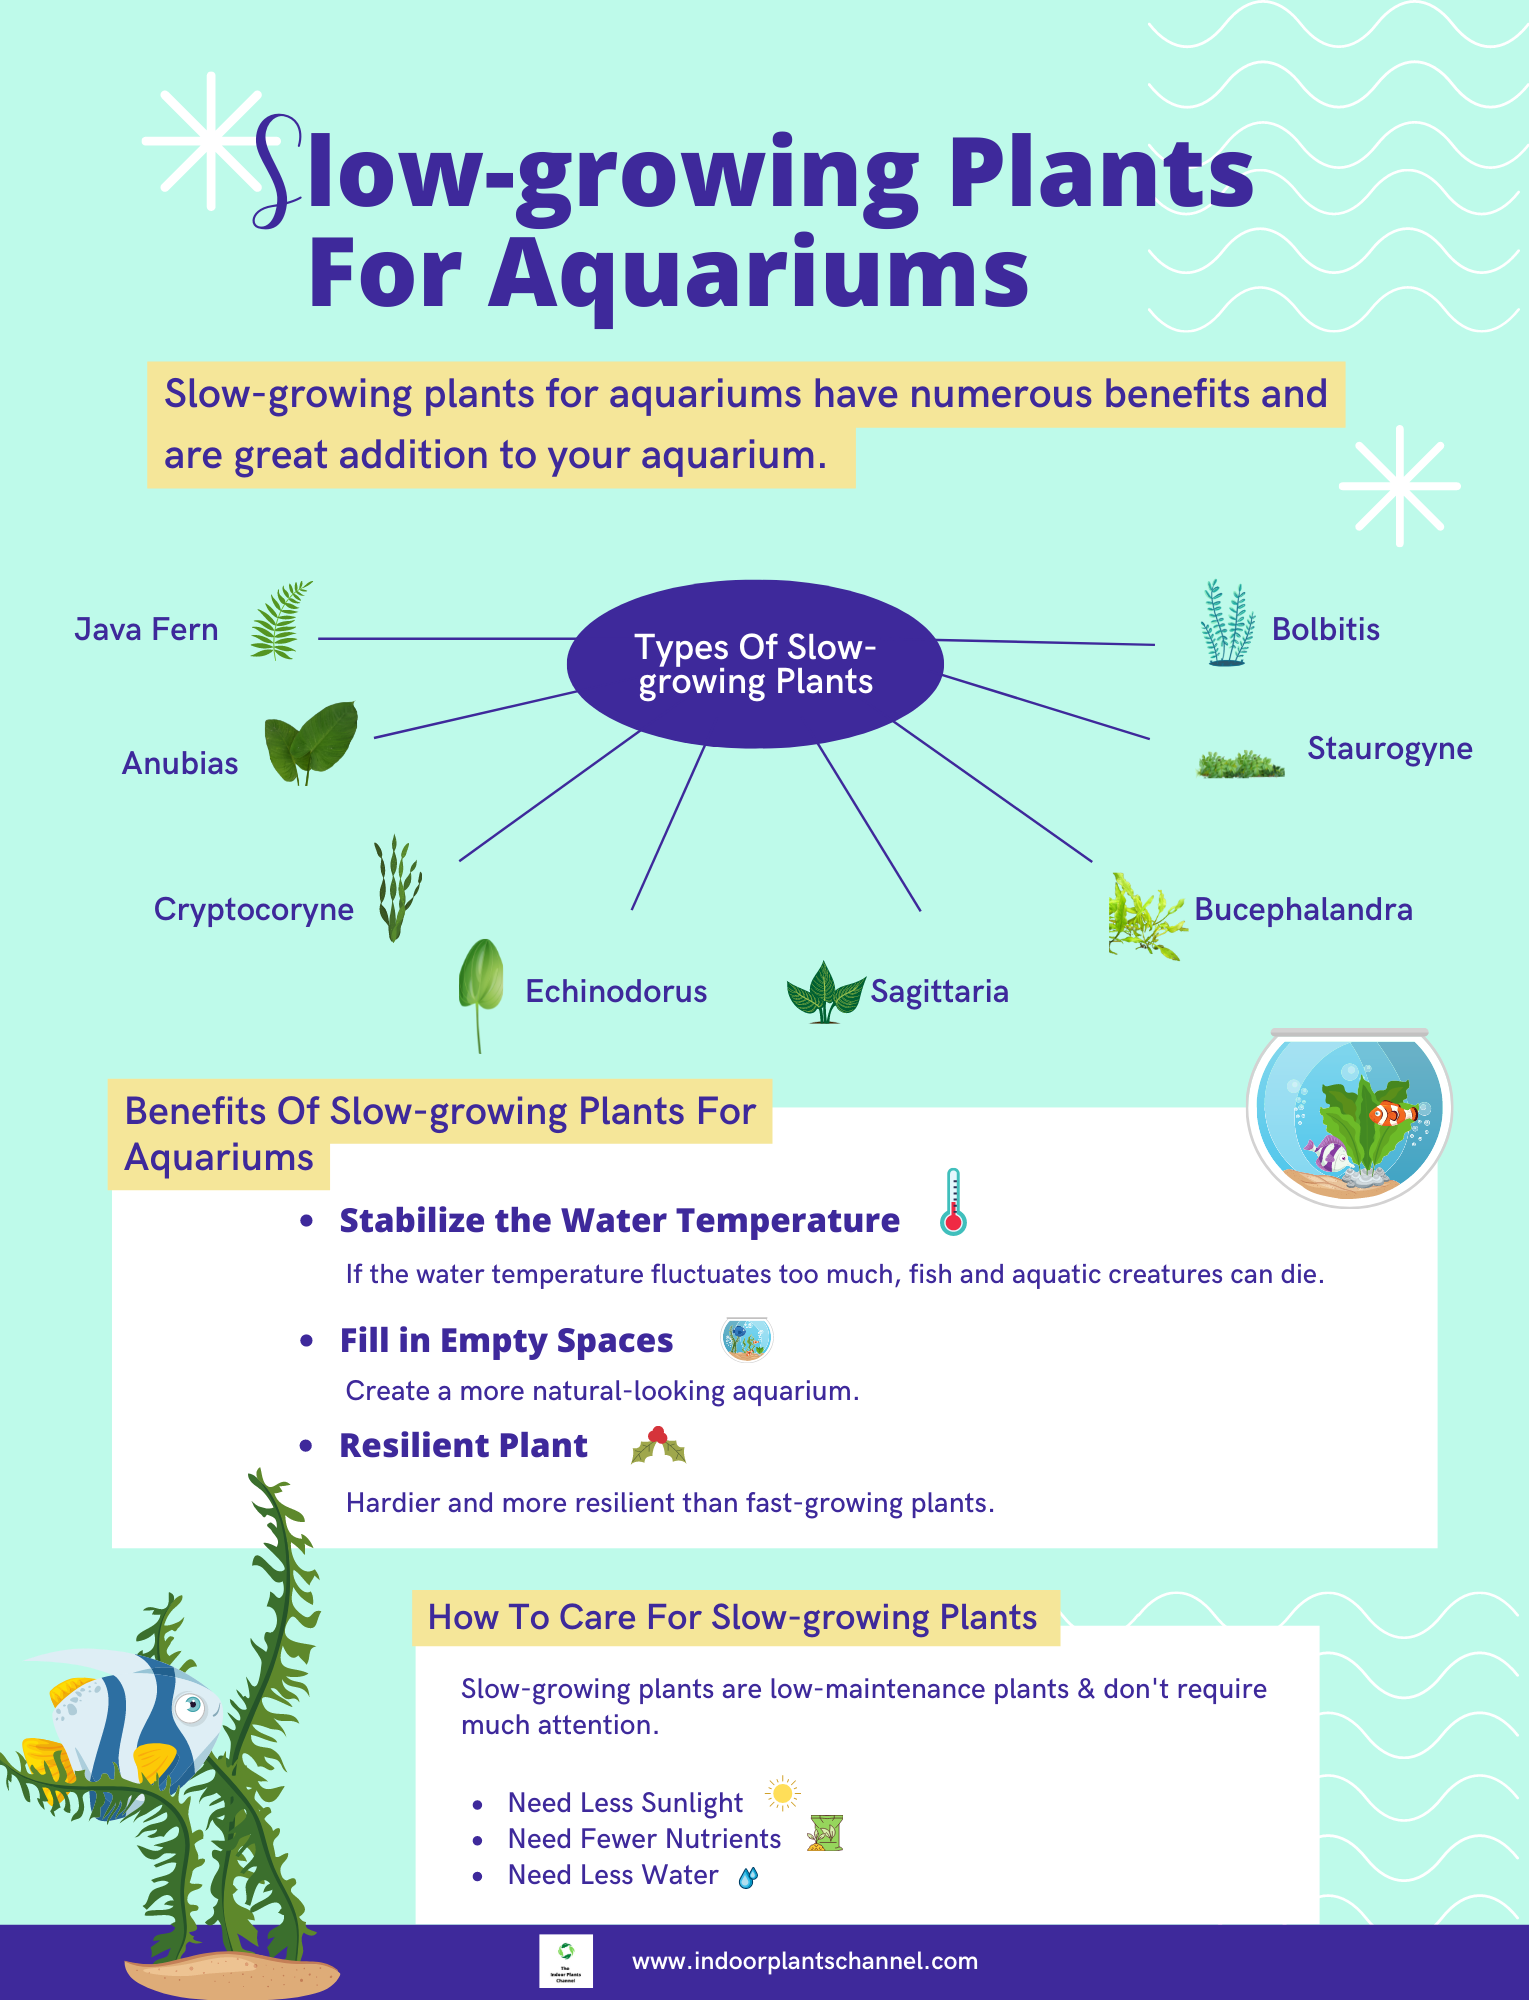 Different Types Of Slow-growing Plants For Aquariums